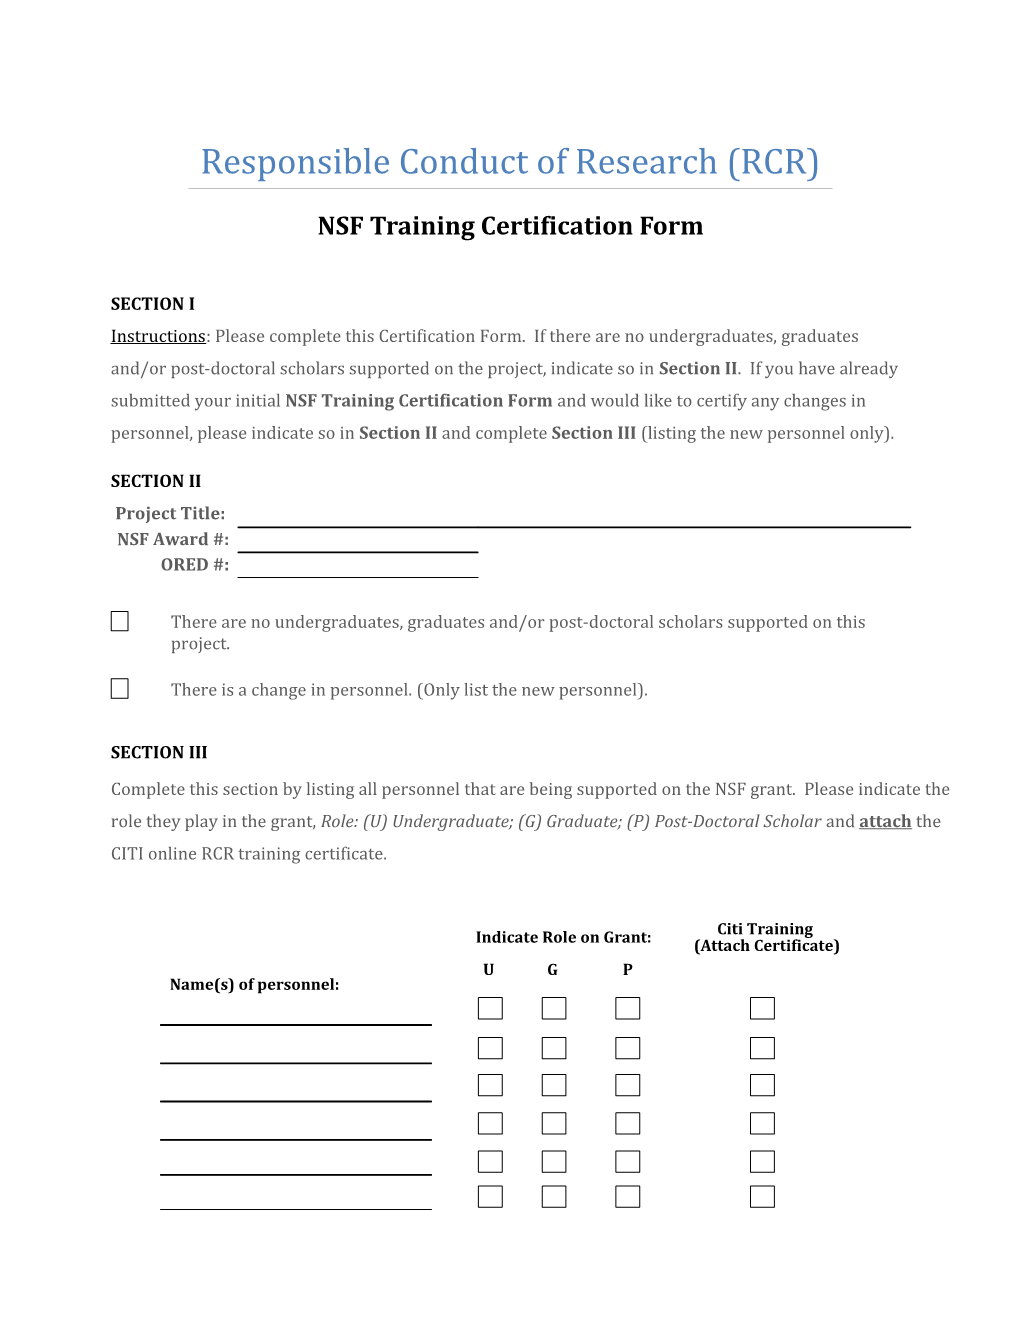 Responsible Conduct of Research (RCR) Training Certification Form